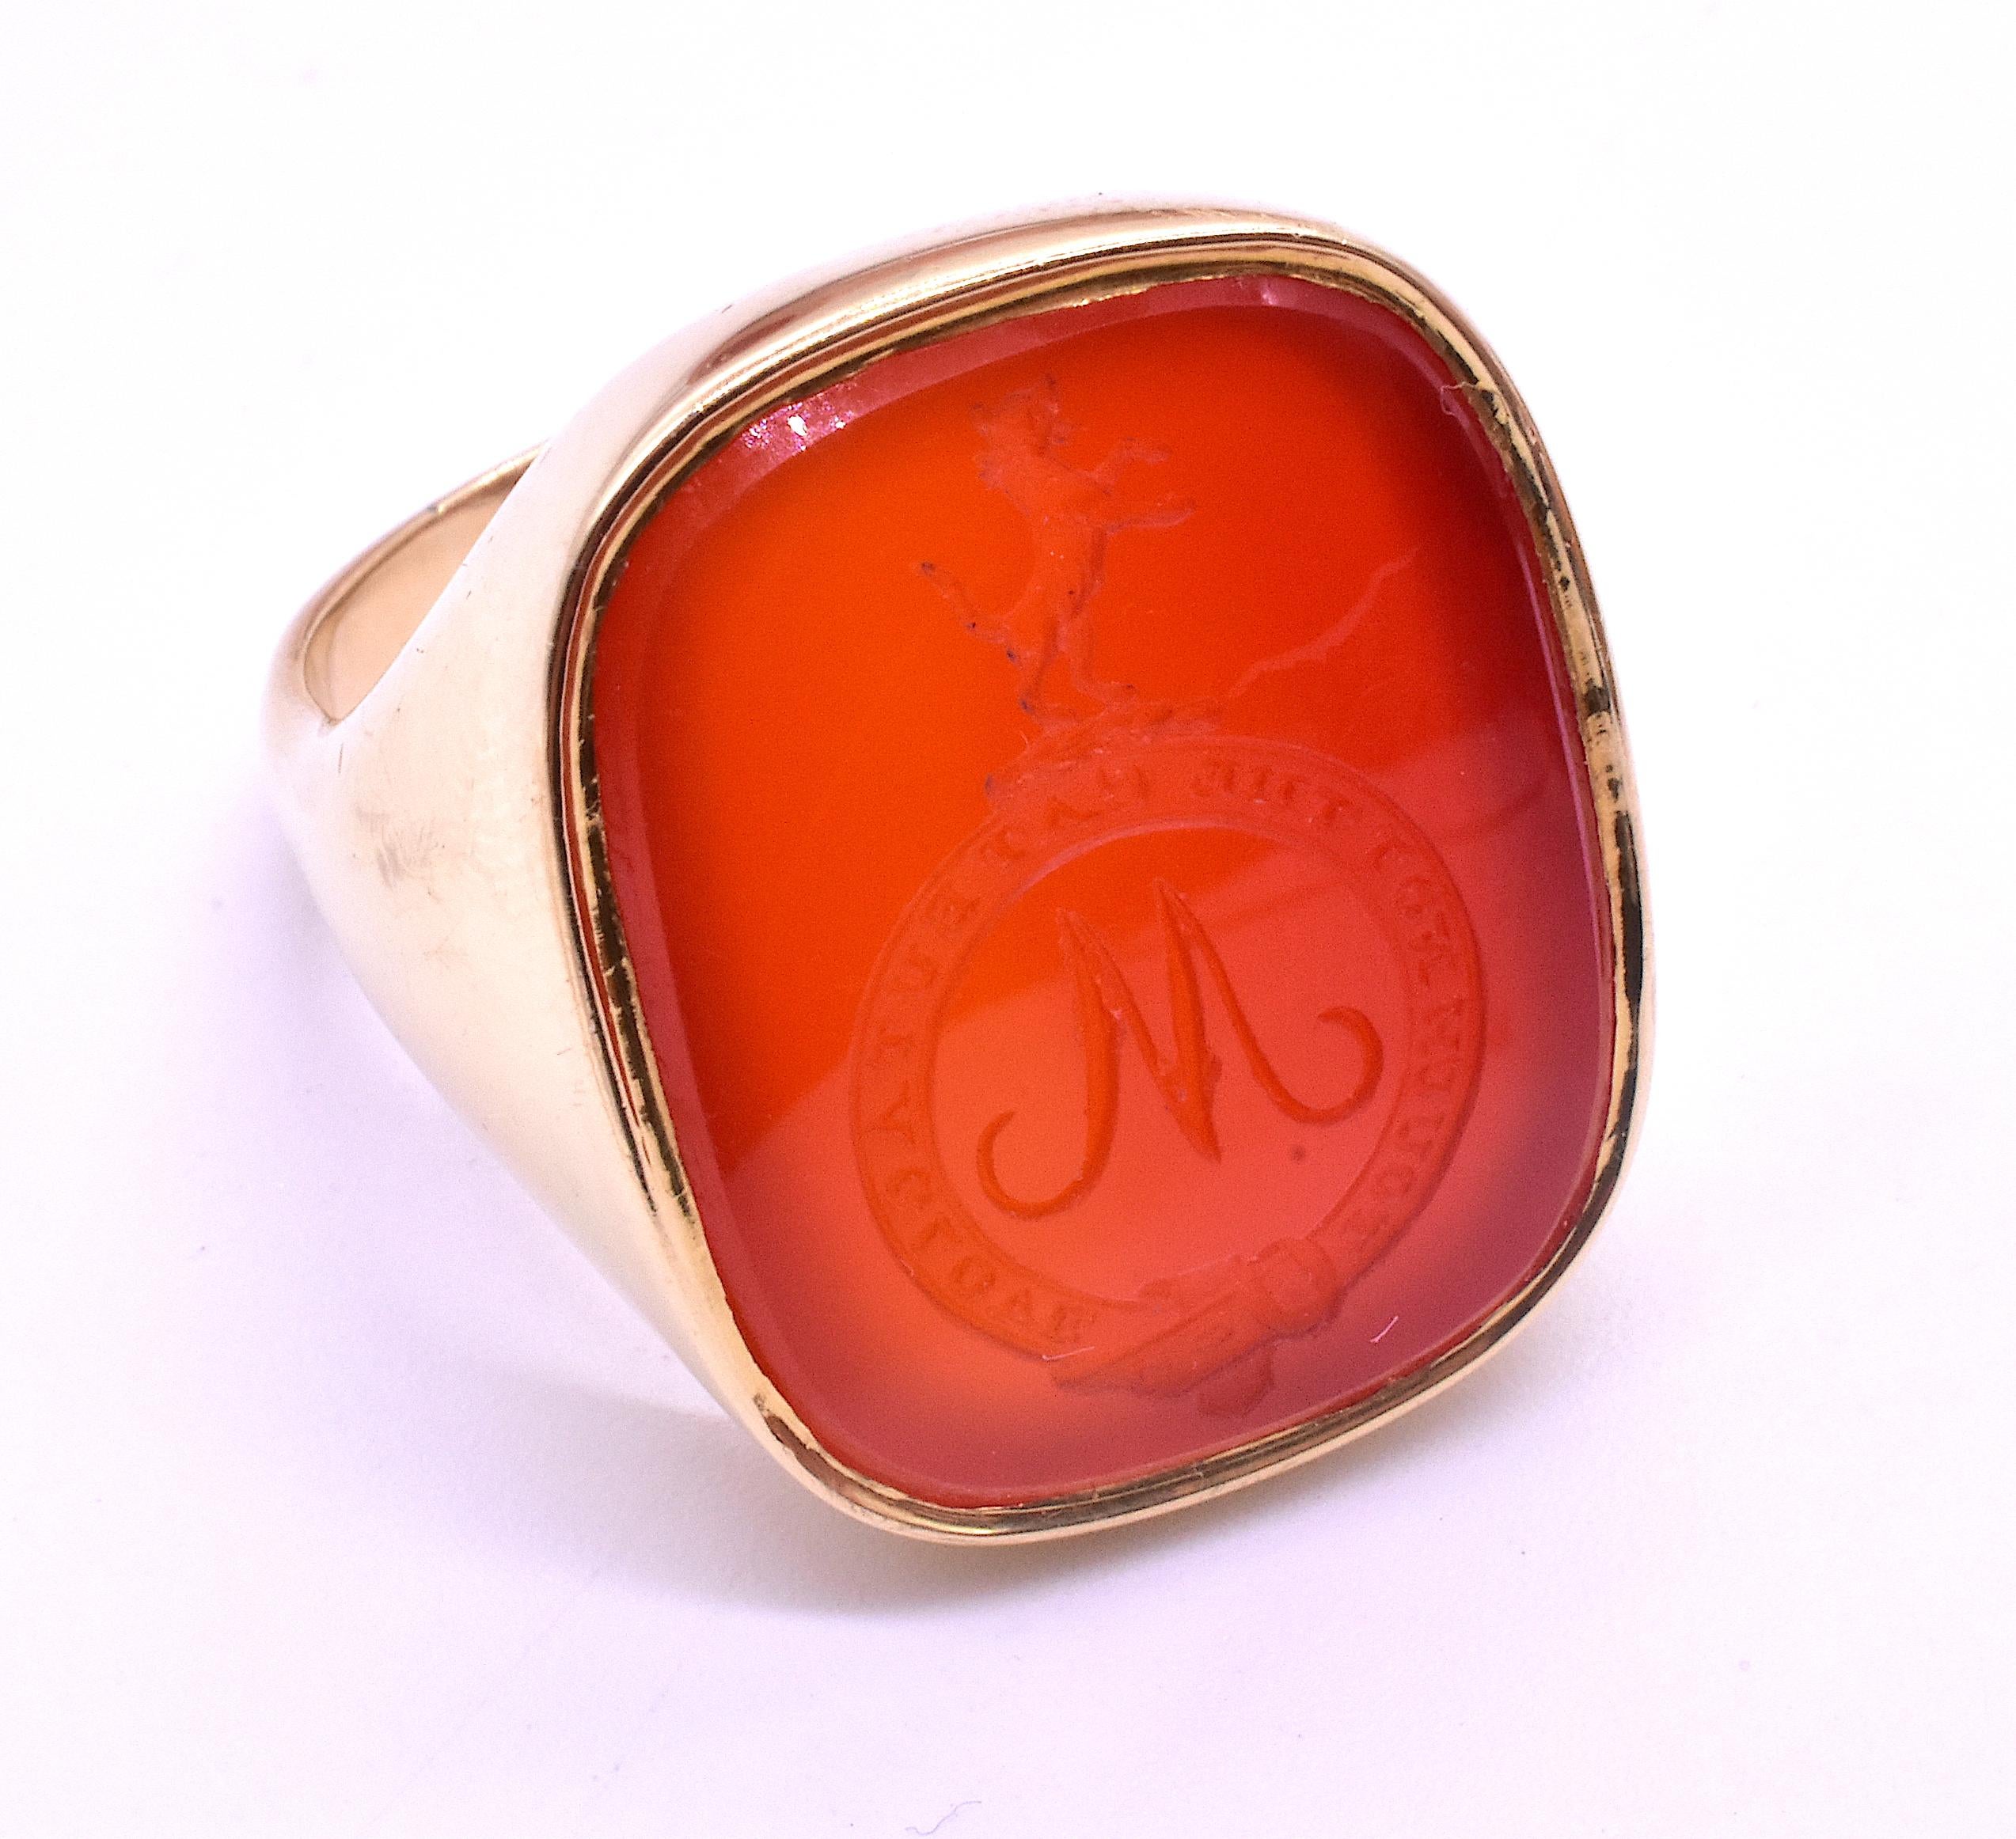 Fabulous Scottish carnelian signet ring with a fierce looking Scottish wildcat in mid growl or hiss standing on his or her hind legs. Below the banner is a monogram of the letter W or M, take your pick! The motto reads 